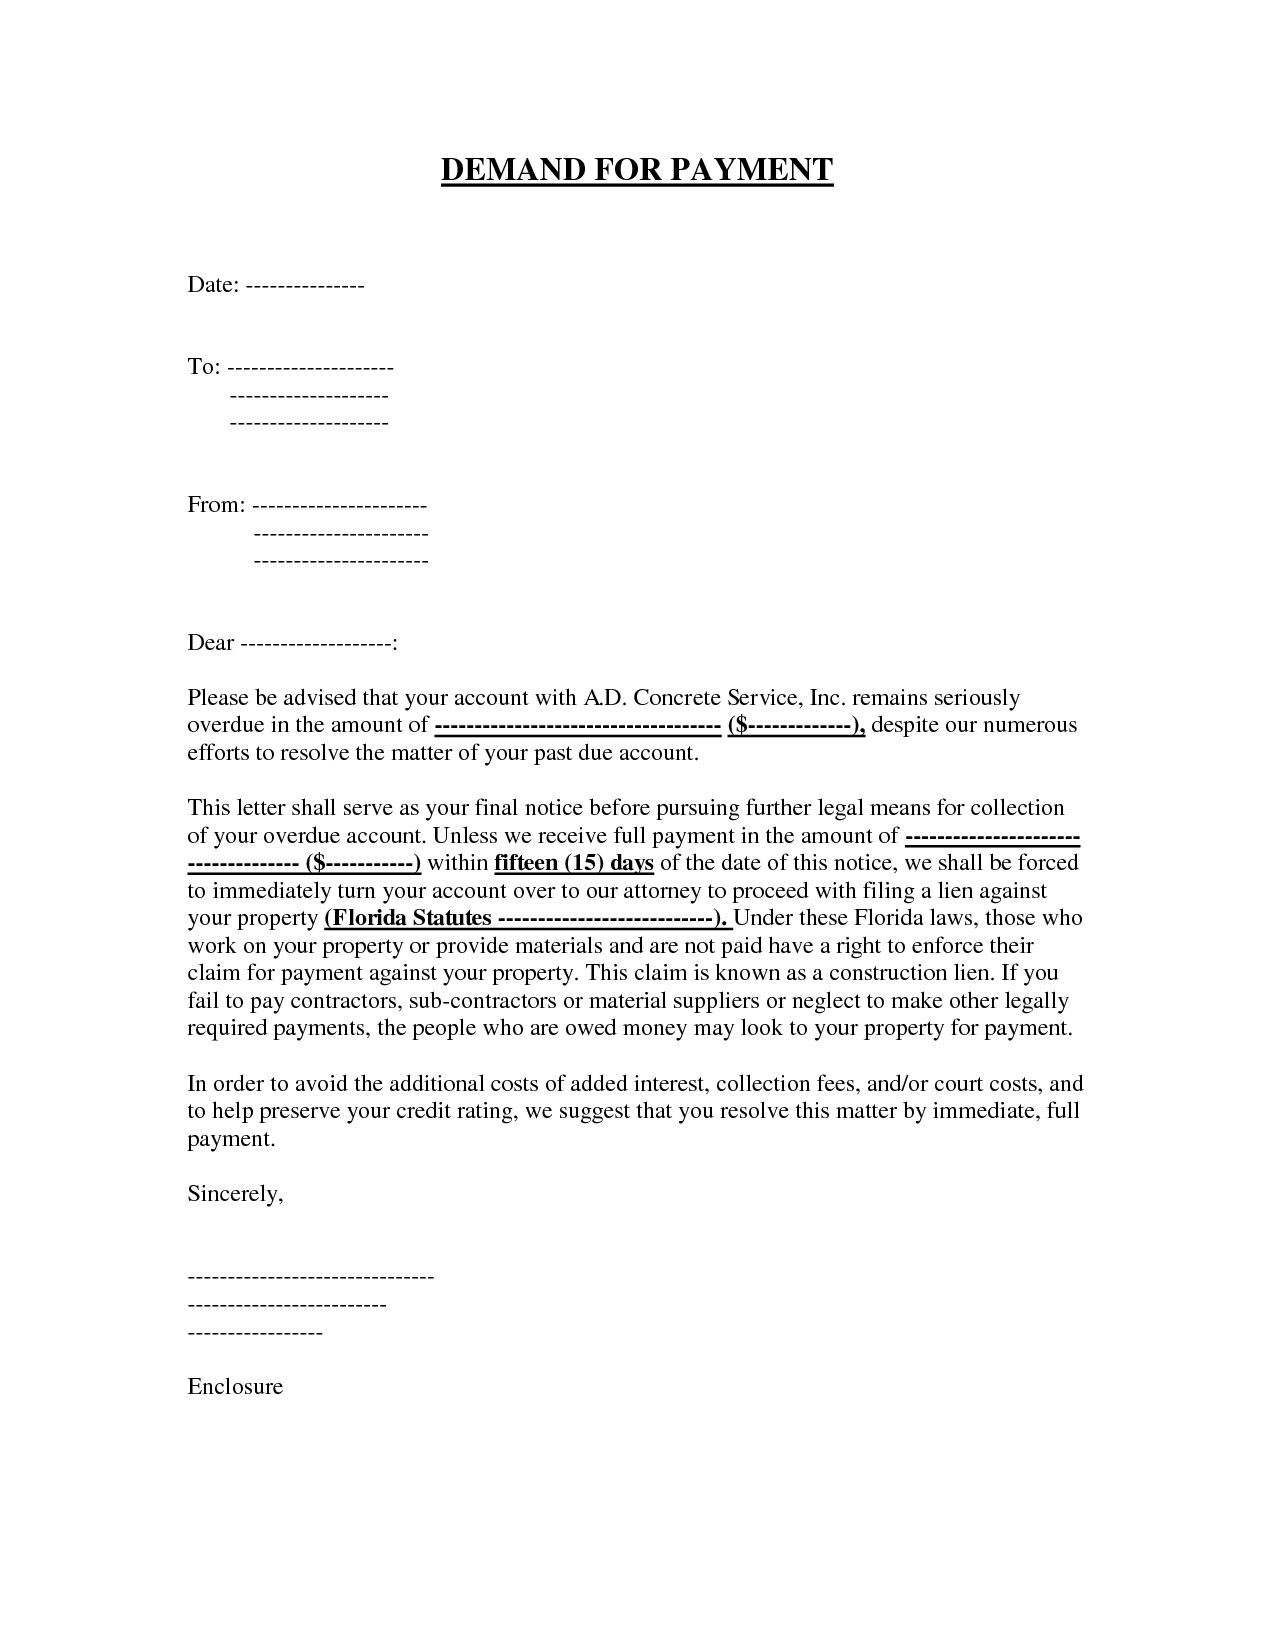 Demand for Payment Letter Template - How to Write A Payment Letter Gallery Letter format formal Sample